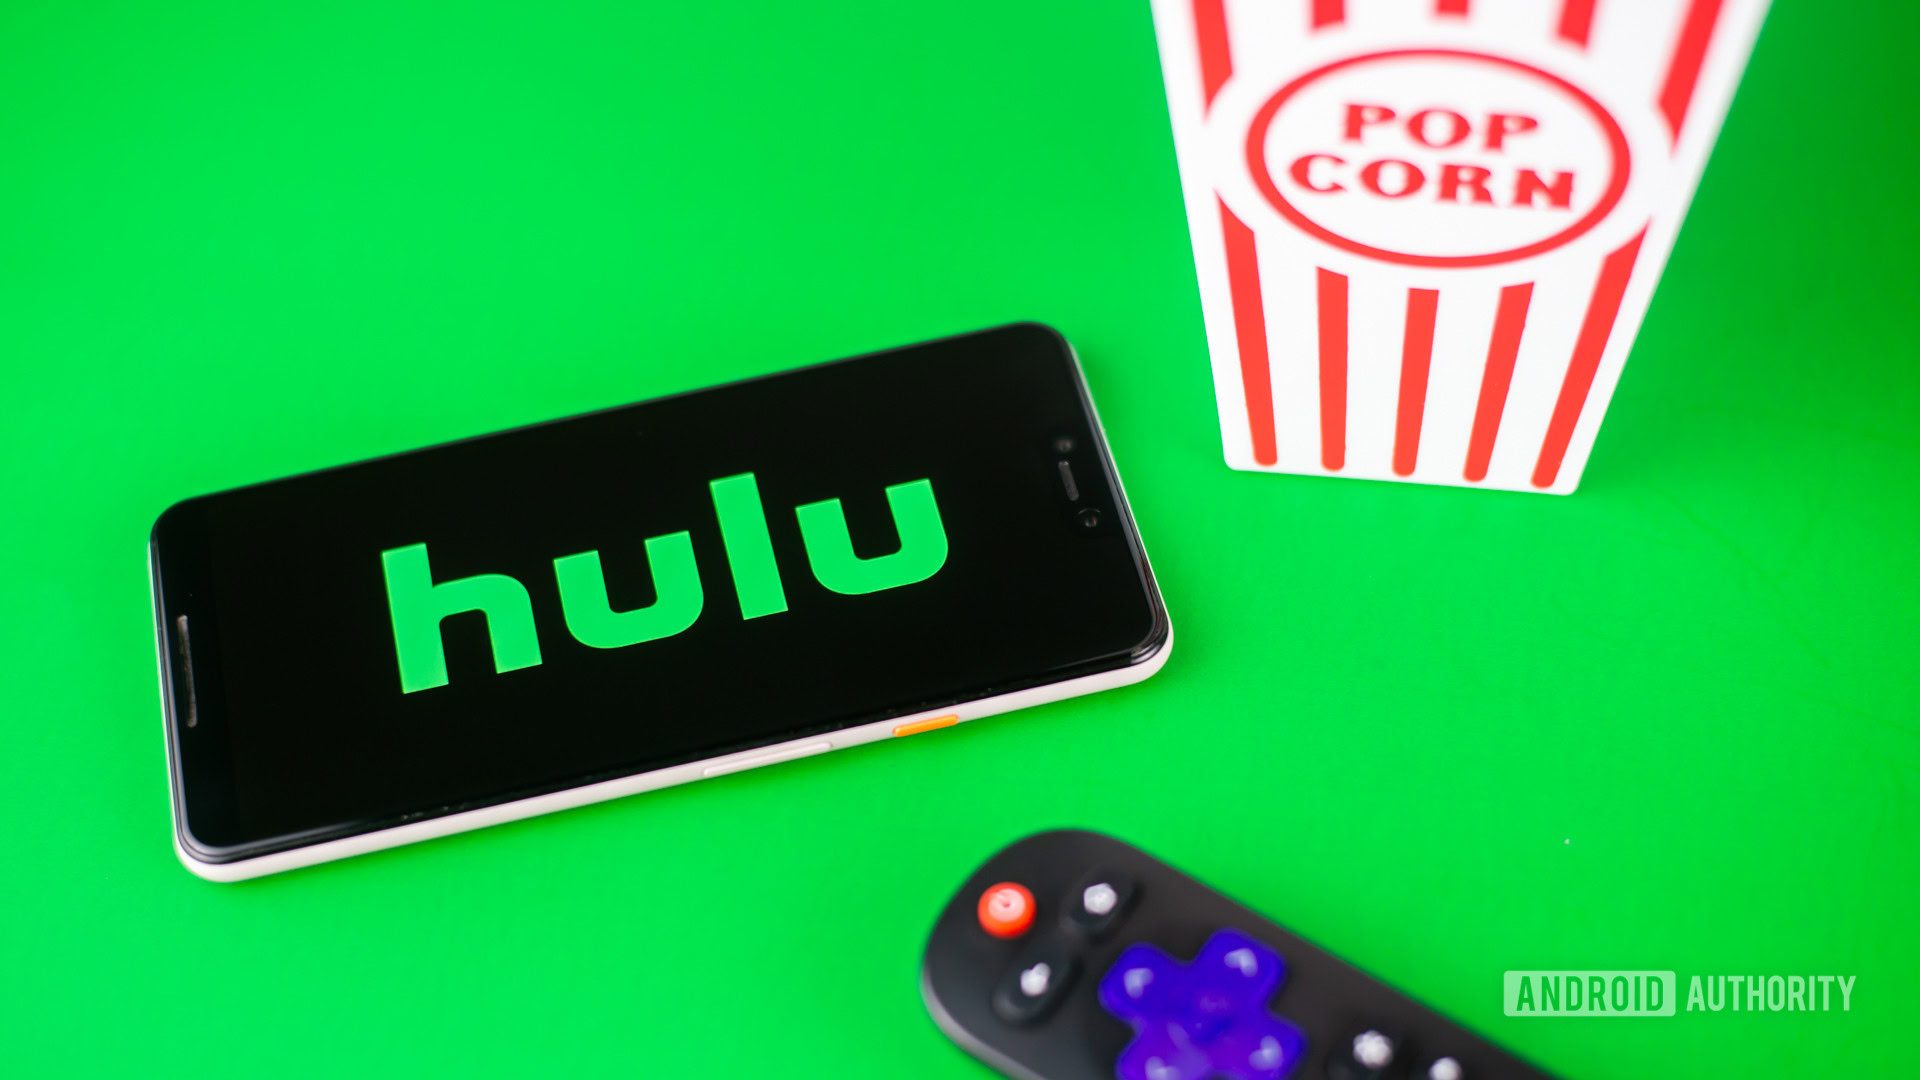 can i download hulu app and use on jump drive